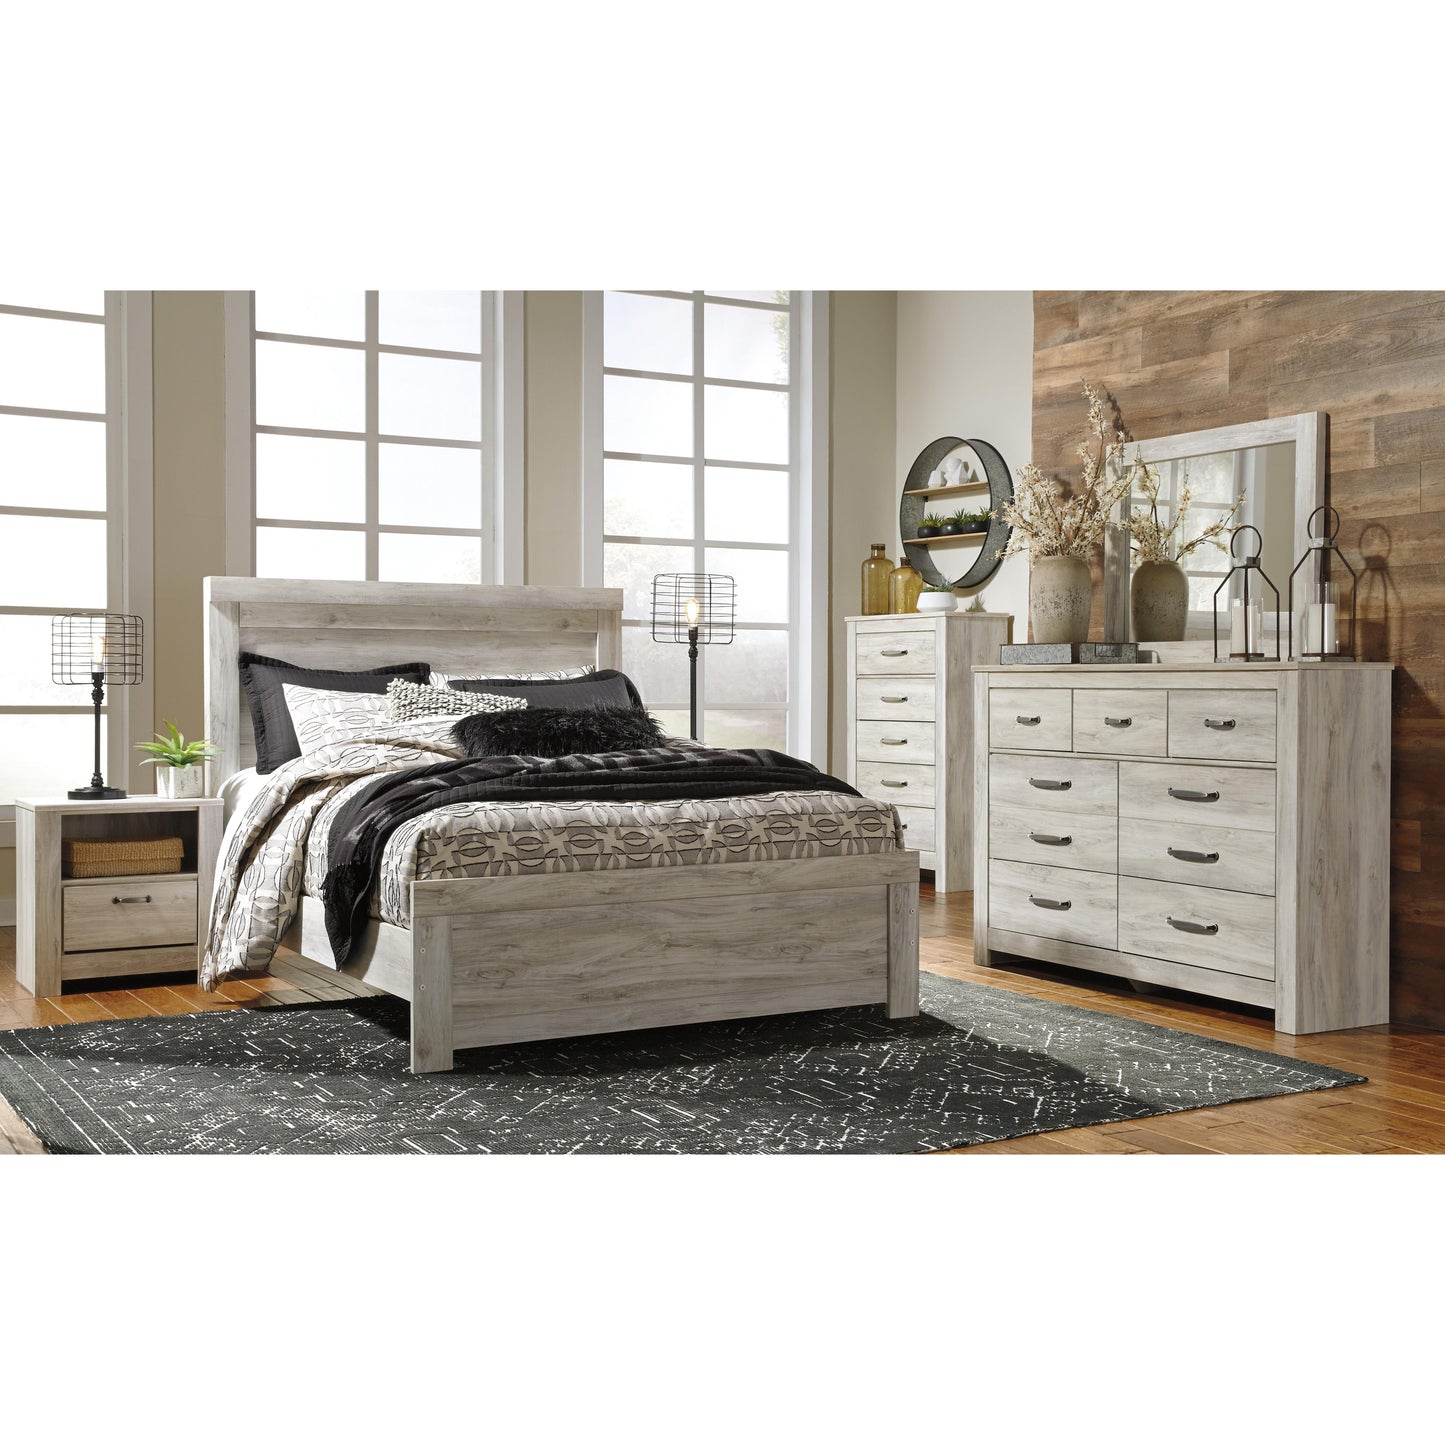 Signature Design by Ashley Bellaby Queen Panel Bed B331-57/B331-54/B331-96